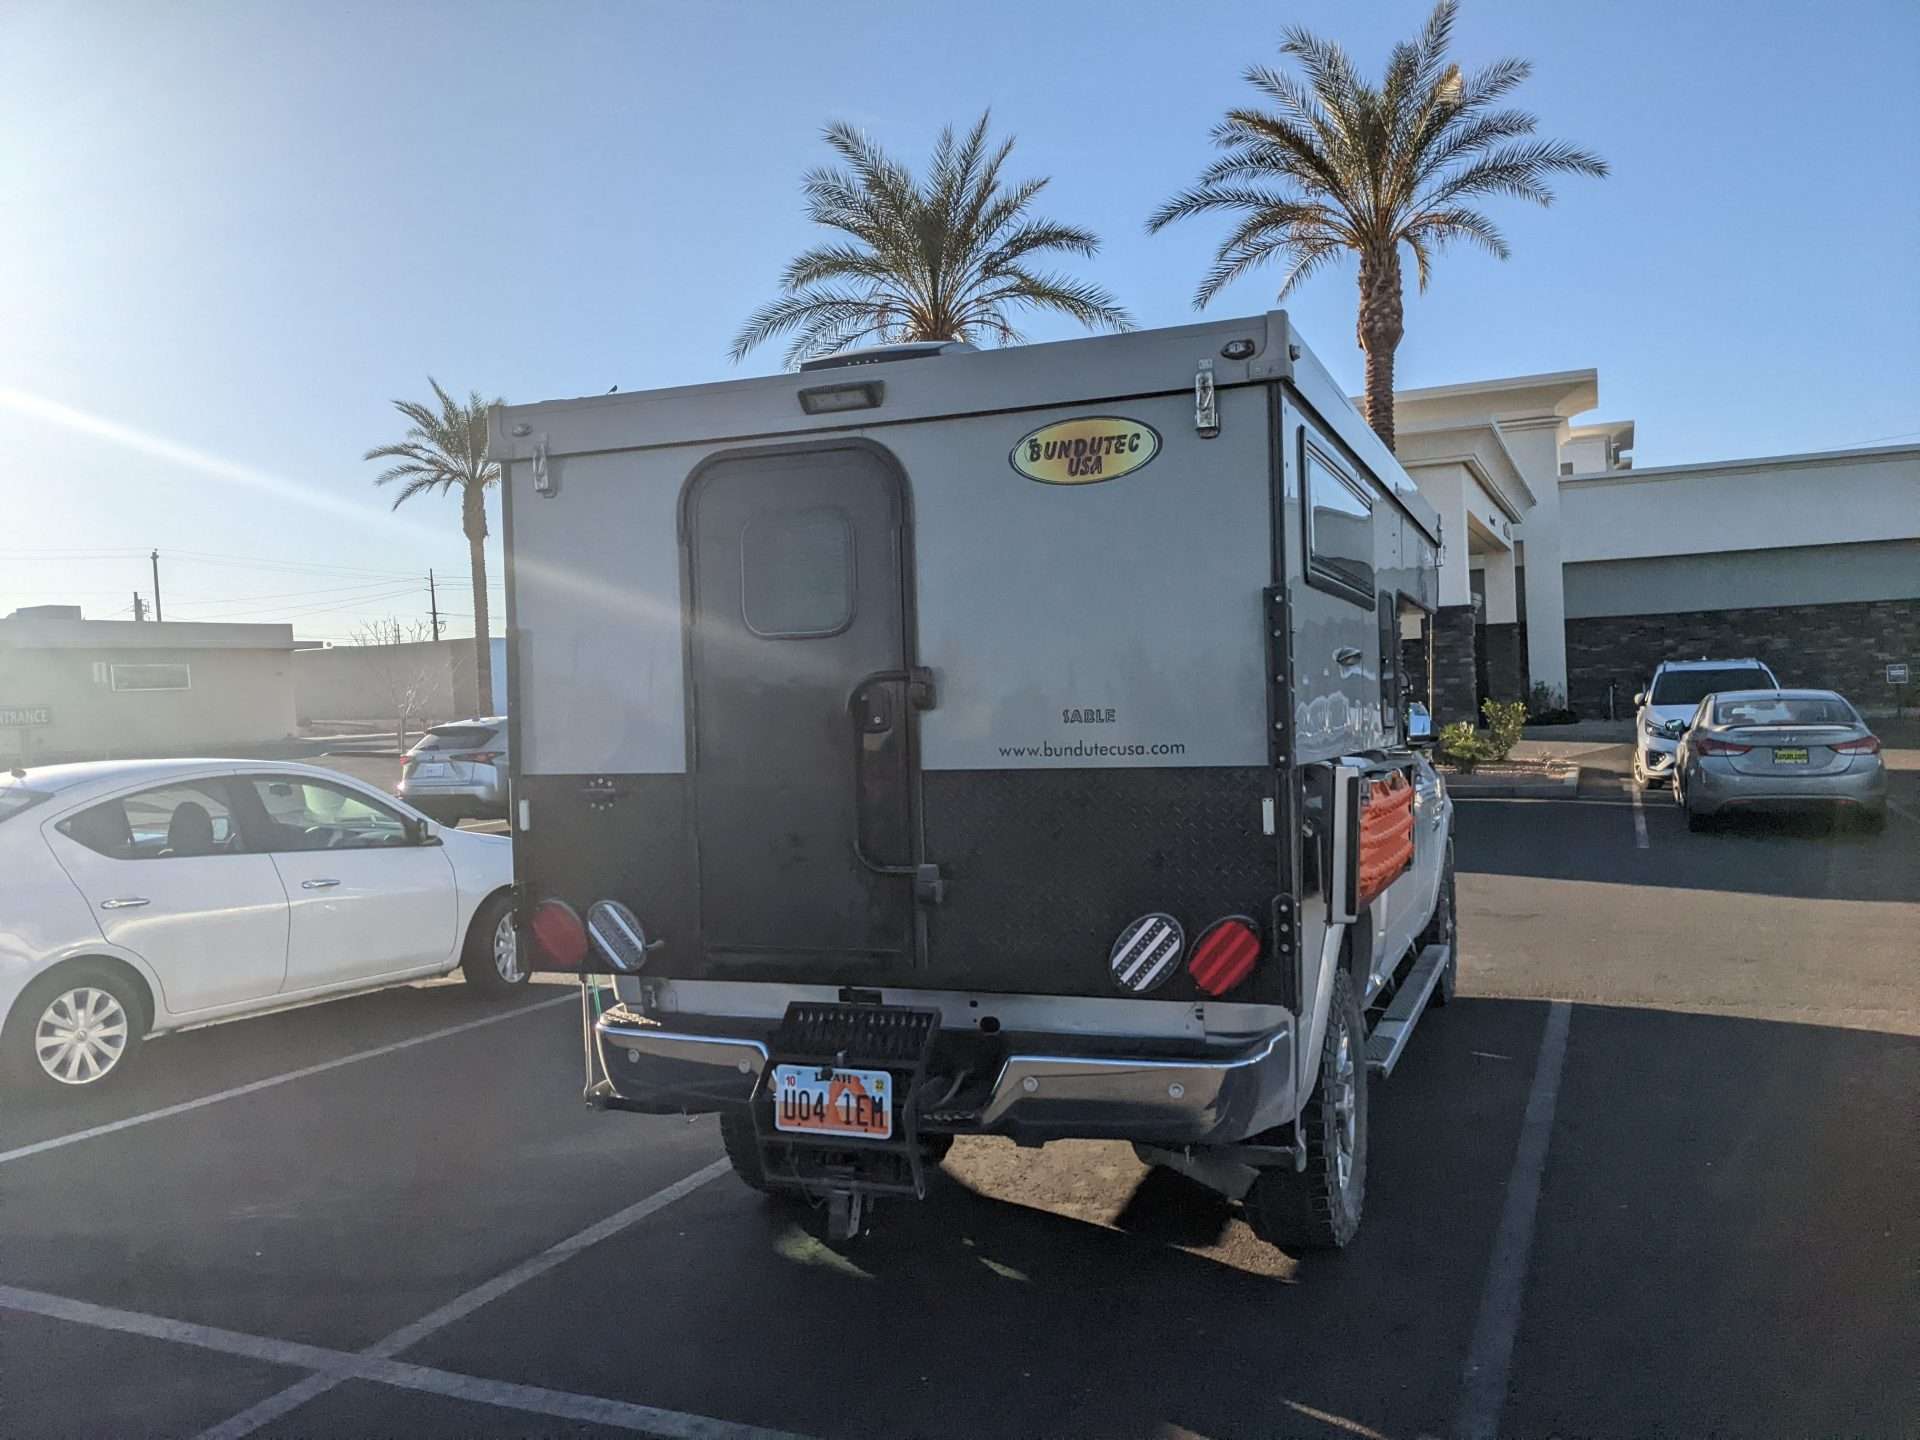 RV parked in Cabela's parking lot for overnight camping